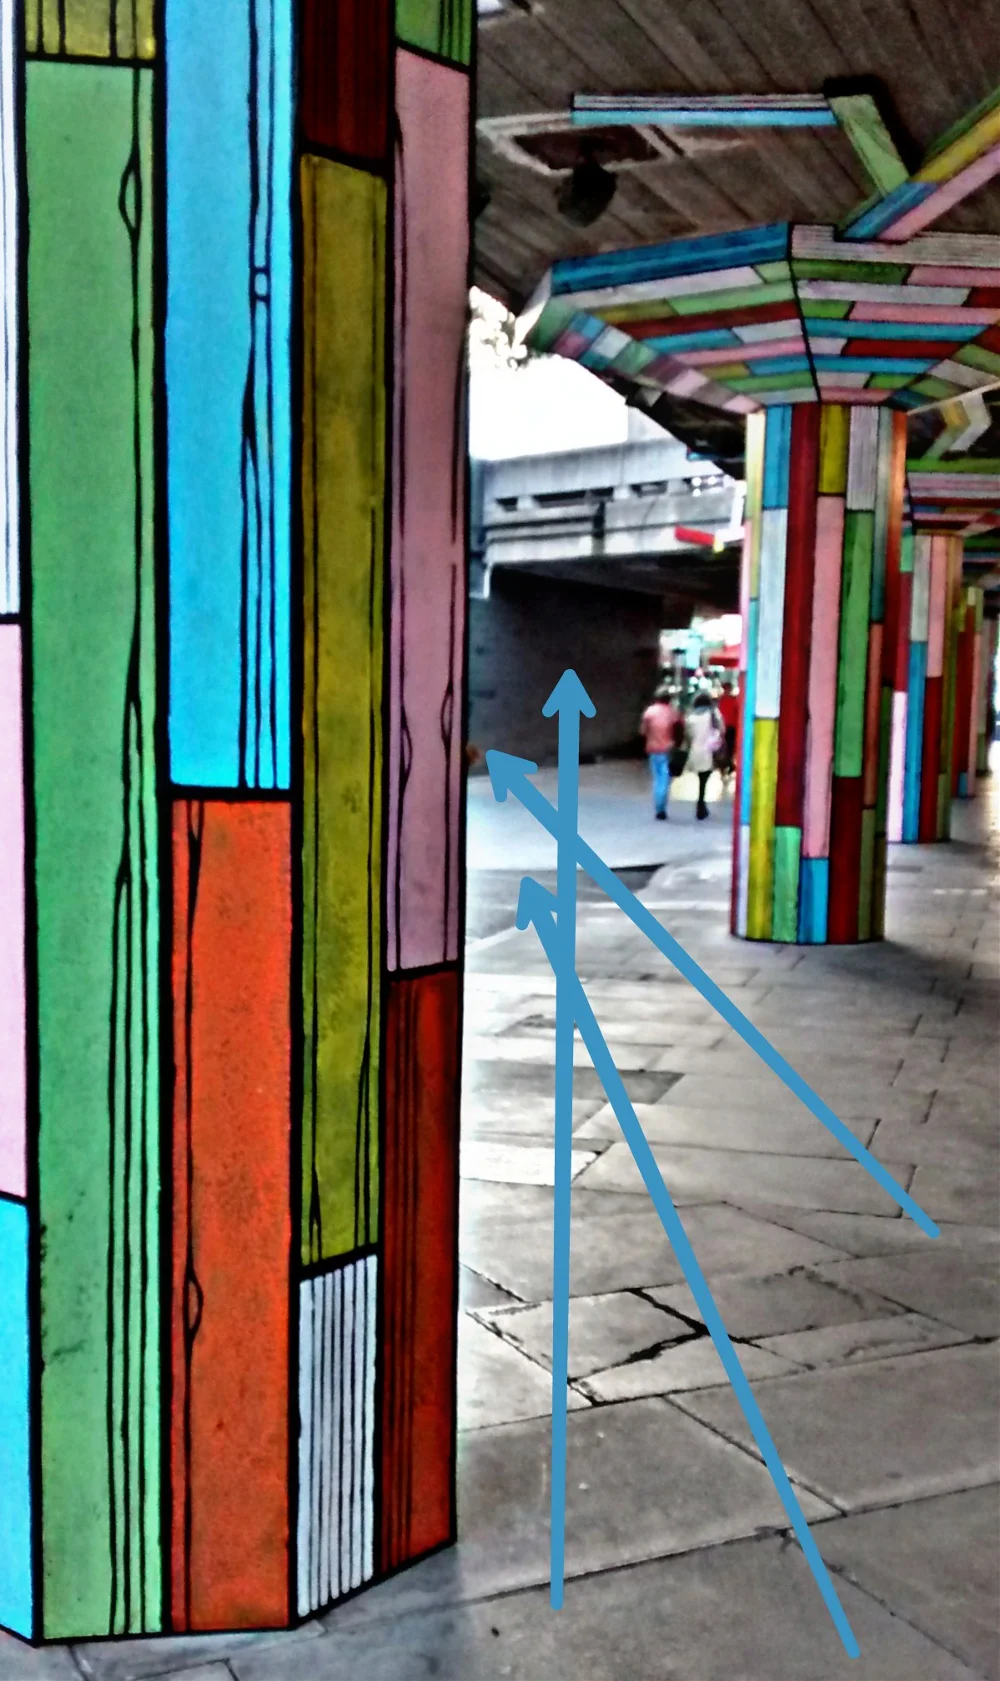 #colorful #urban #architecture #southbank